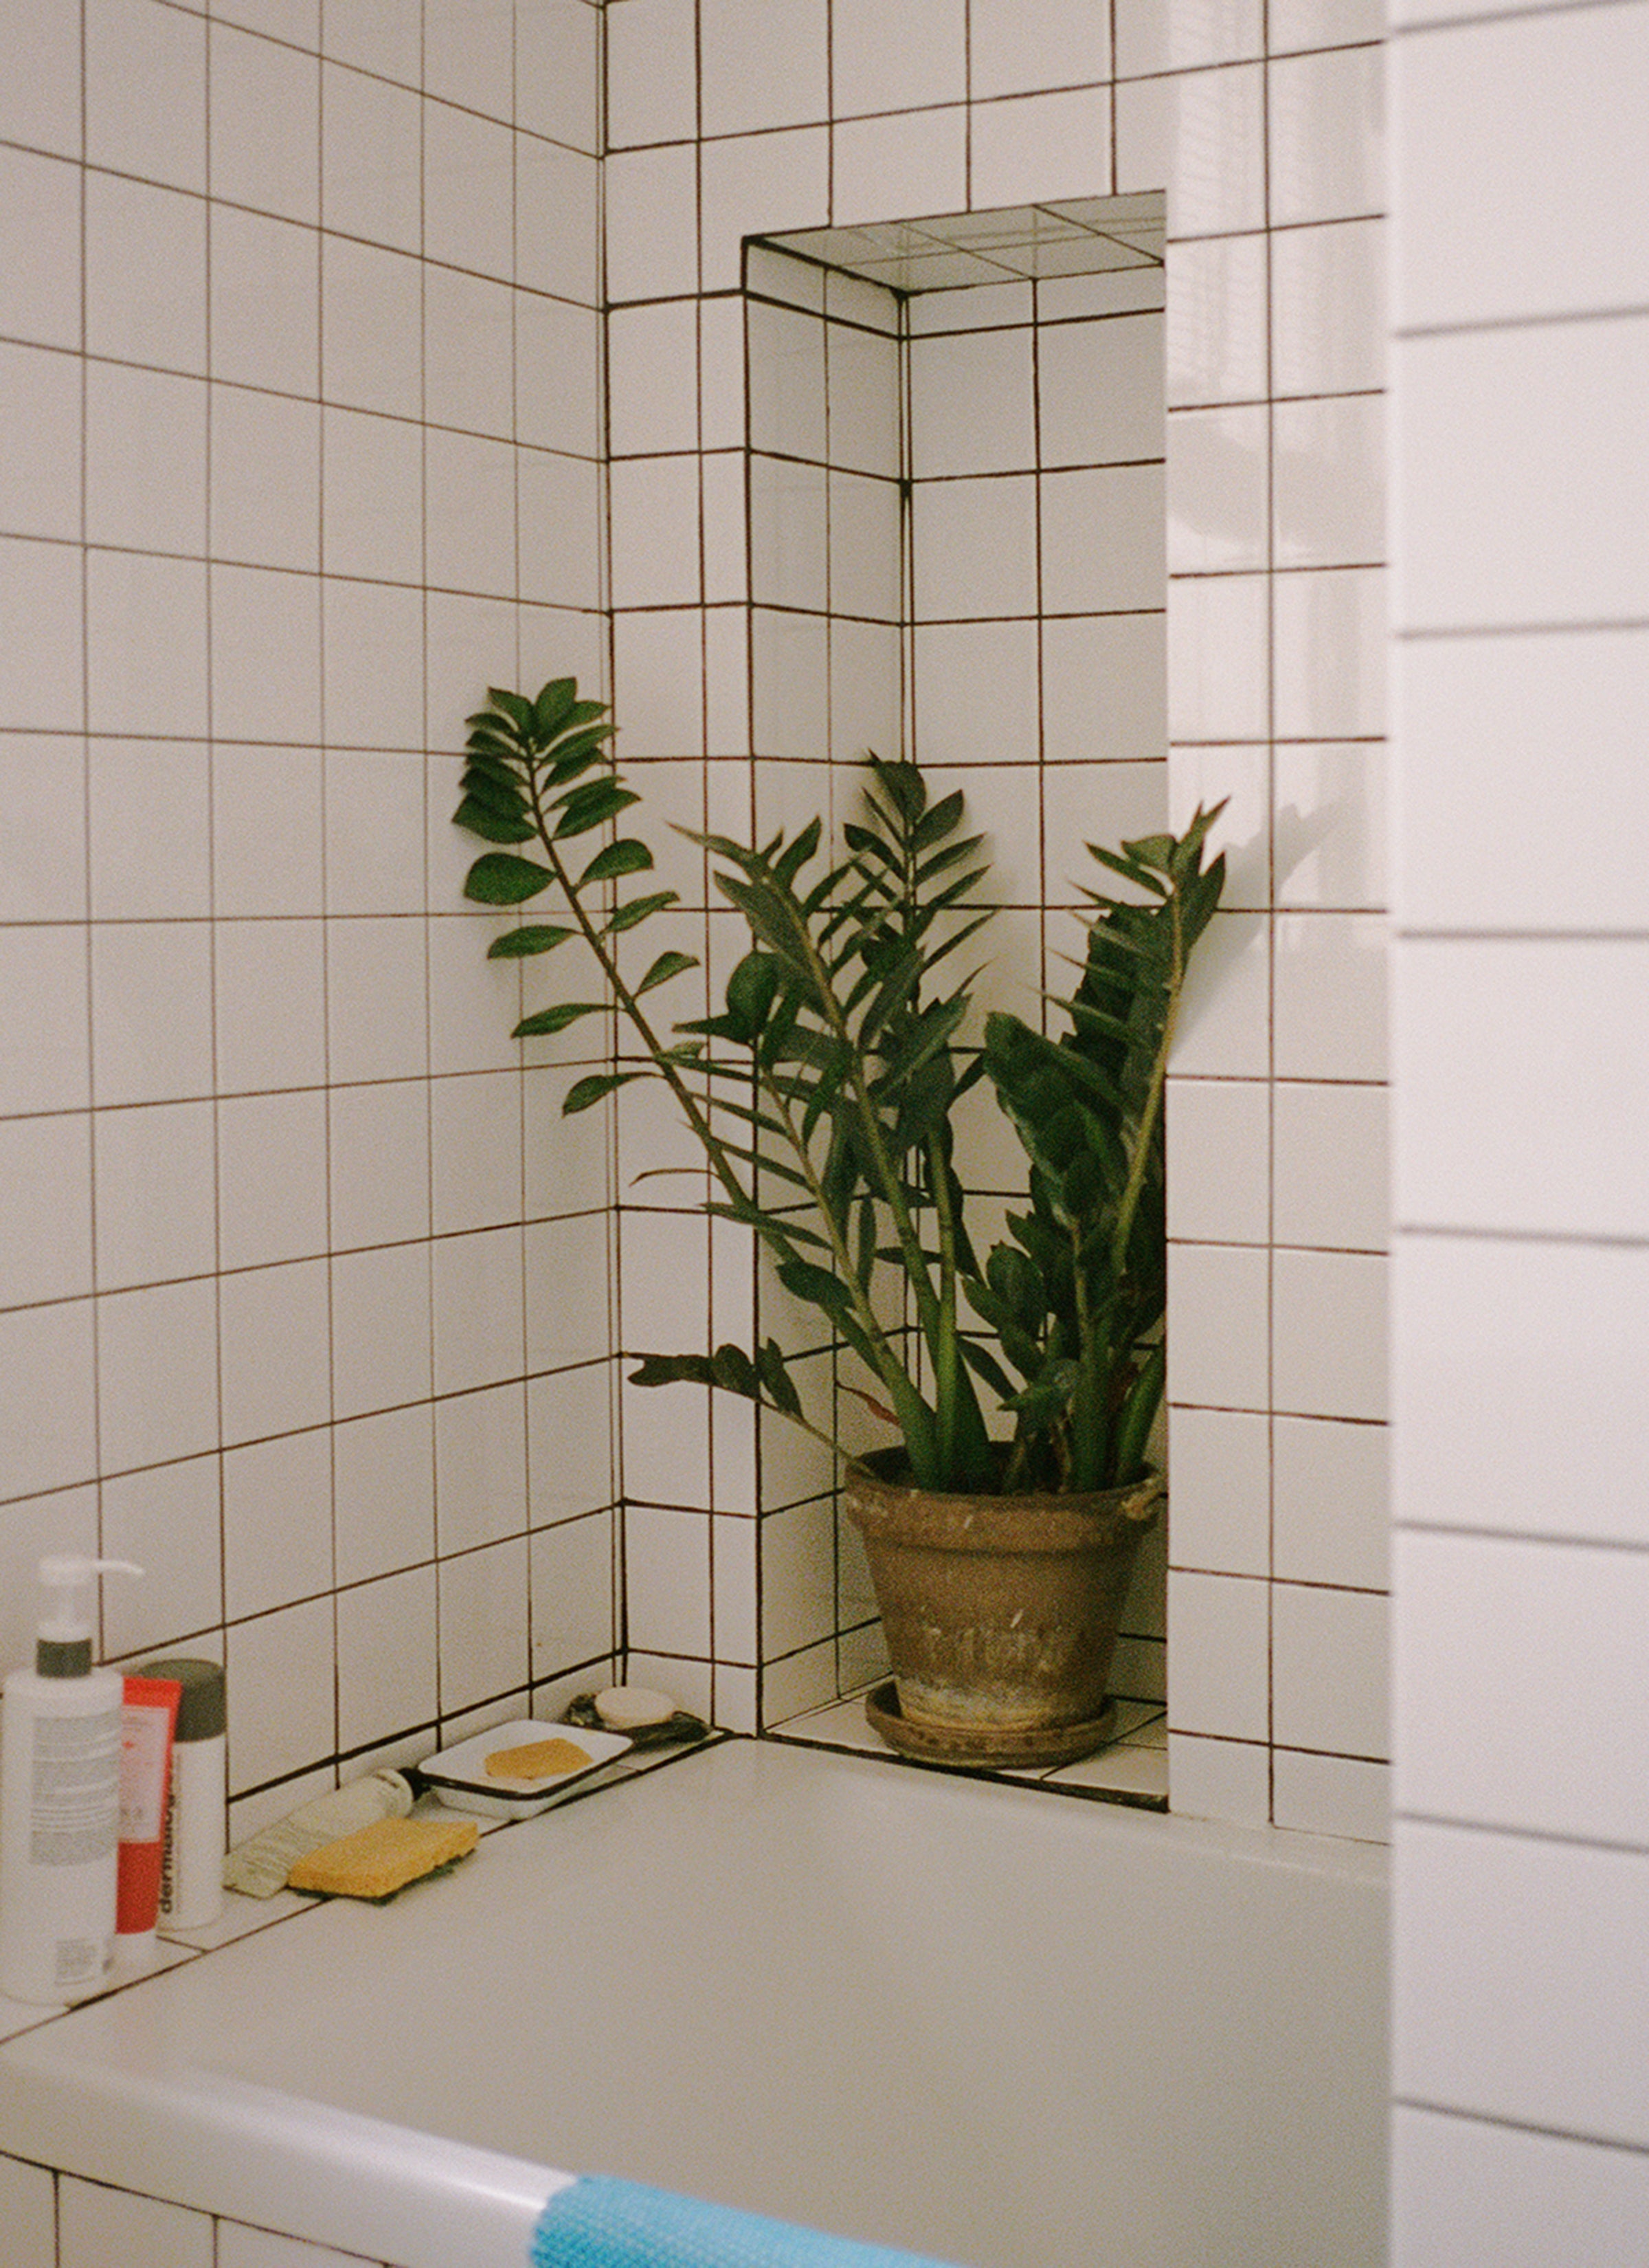 A pot of plants is in the bathroom next to the bathtub and there are shower products soaps next to it.